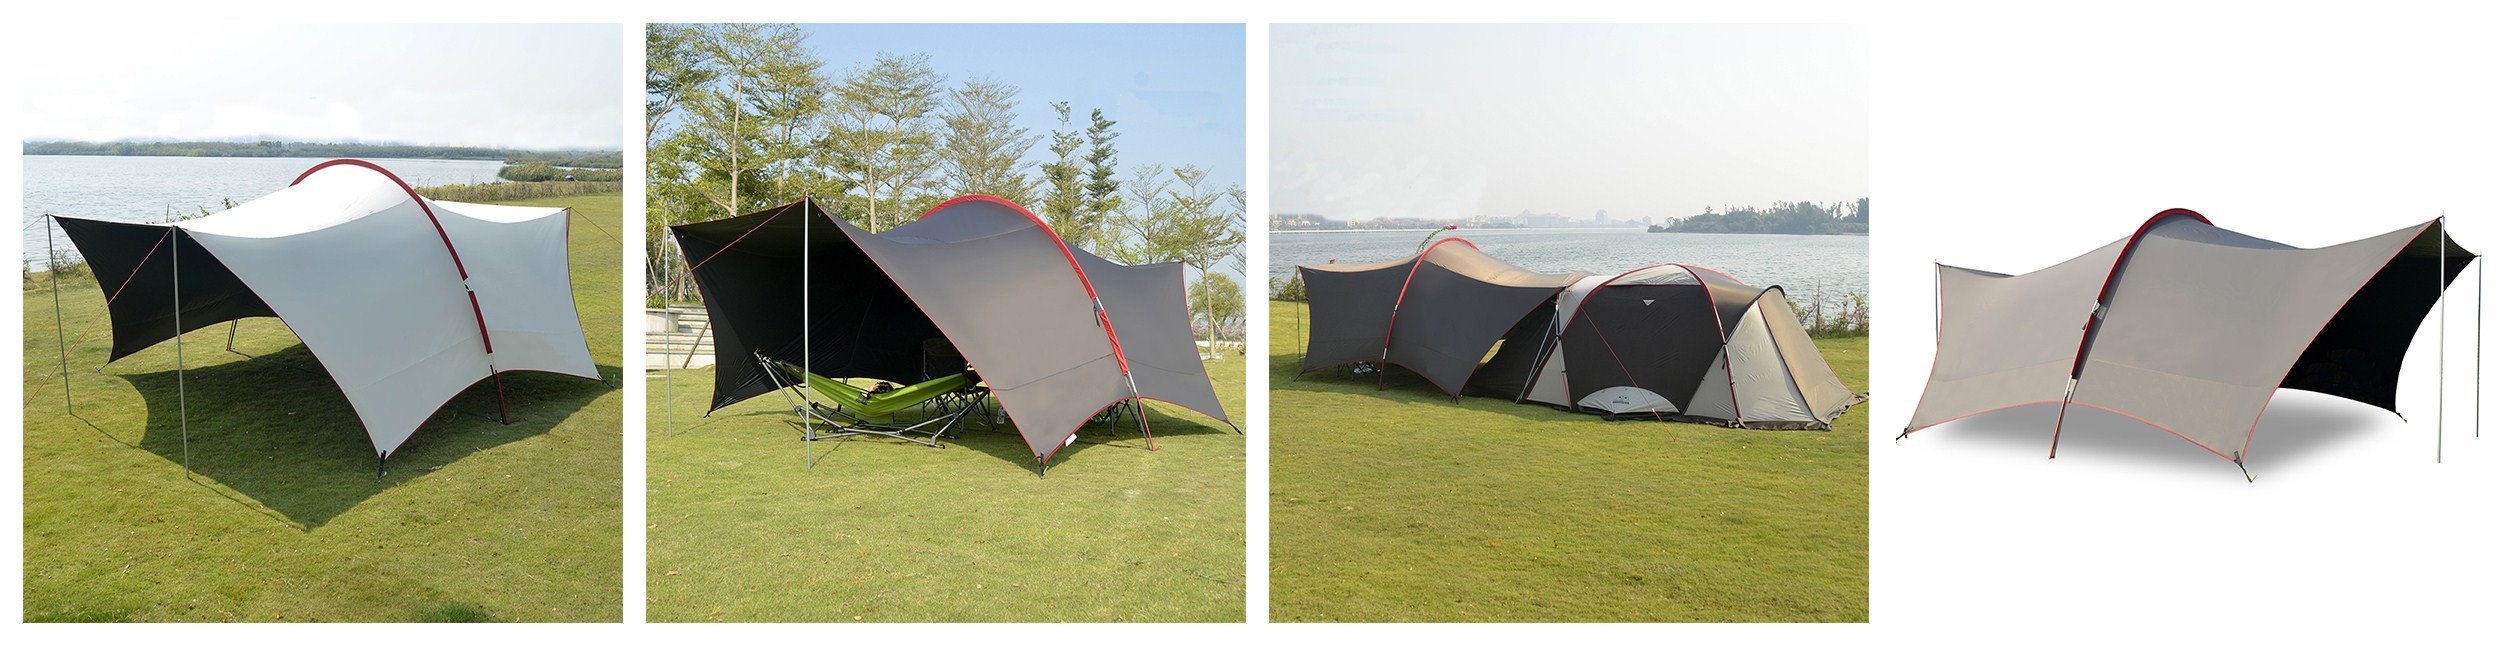 canopy tent for camping .jpg